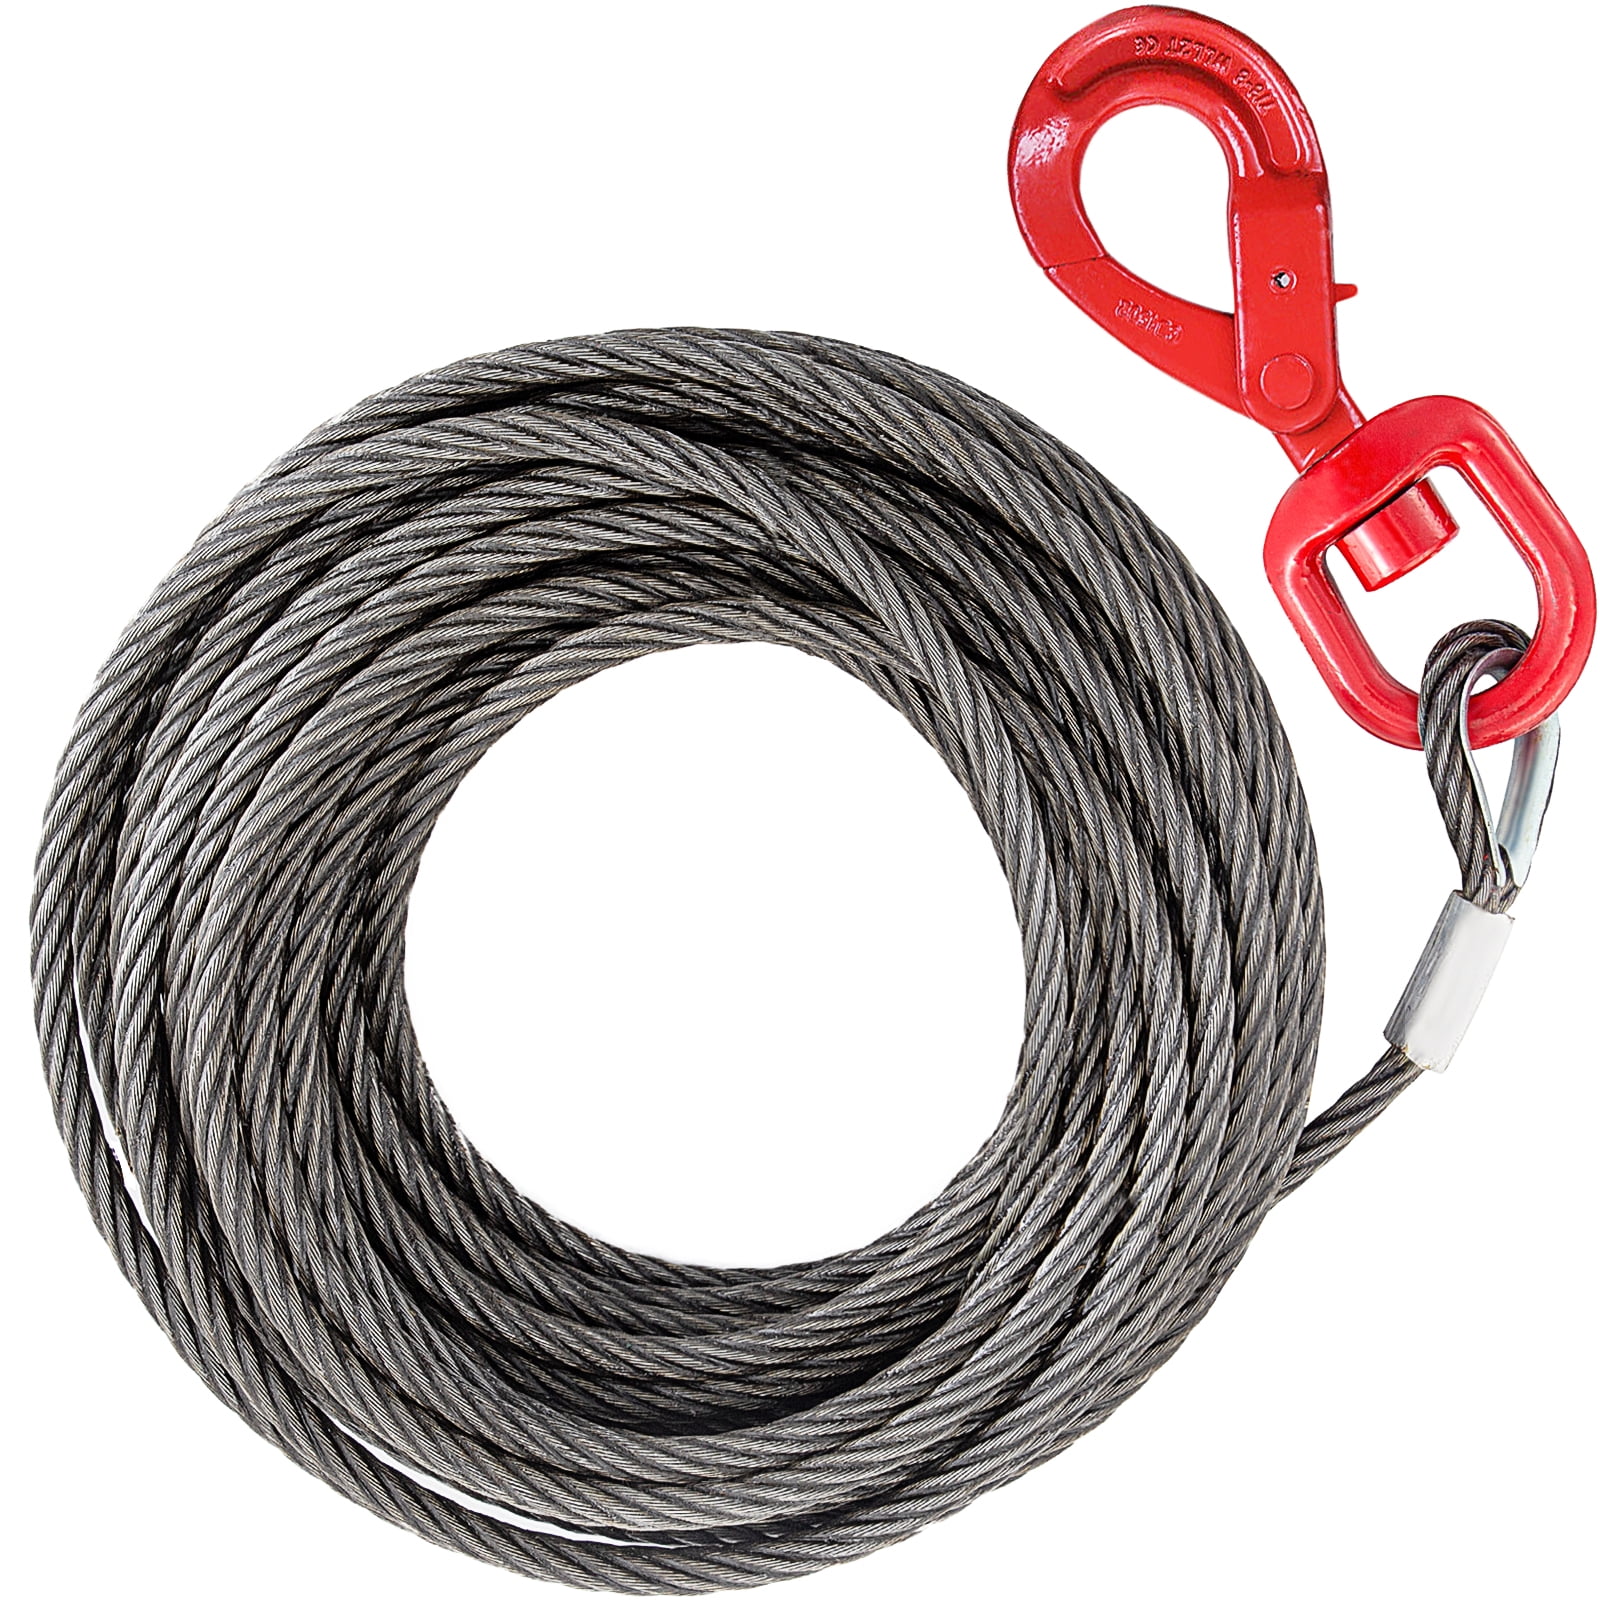 Bentism Winch Cable 8/17 inch x 100' Fiber Core Self Locking Swivel Hook Tow Truck Flatbed, Size: 3/8'' x 100